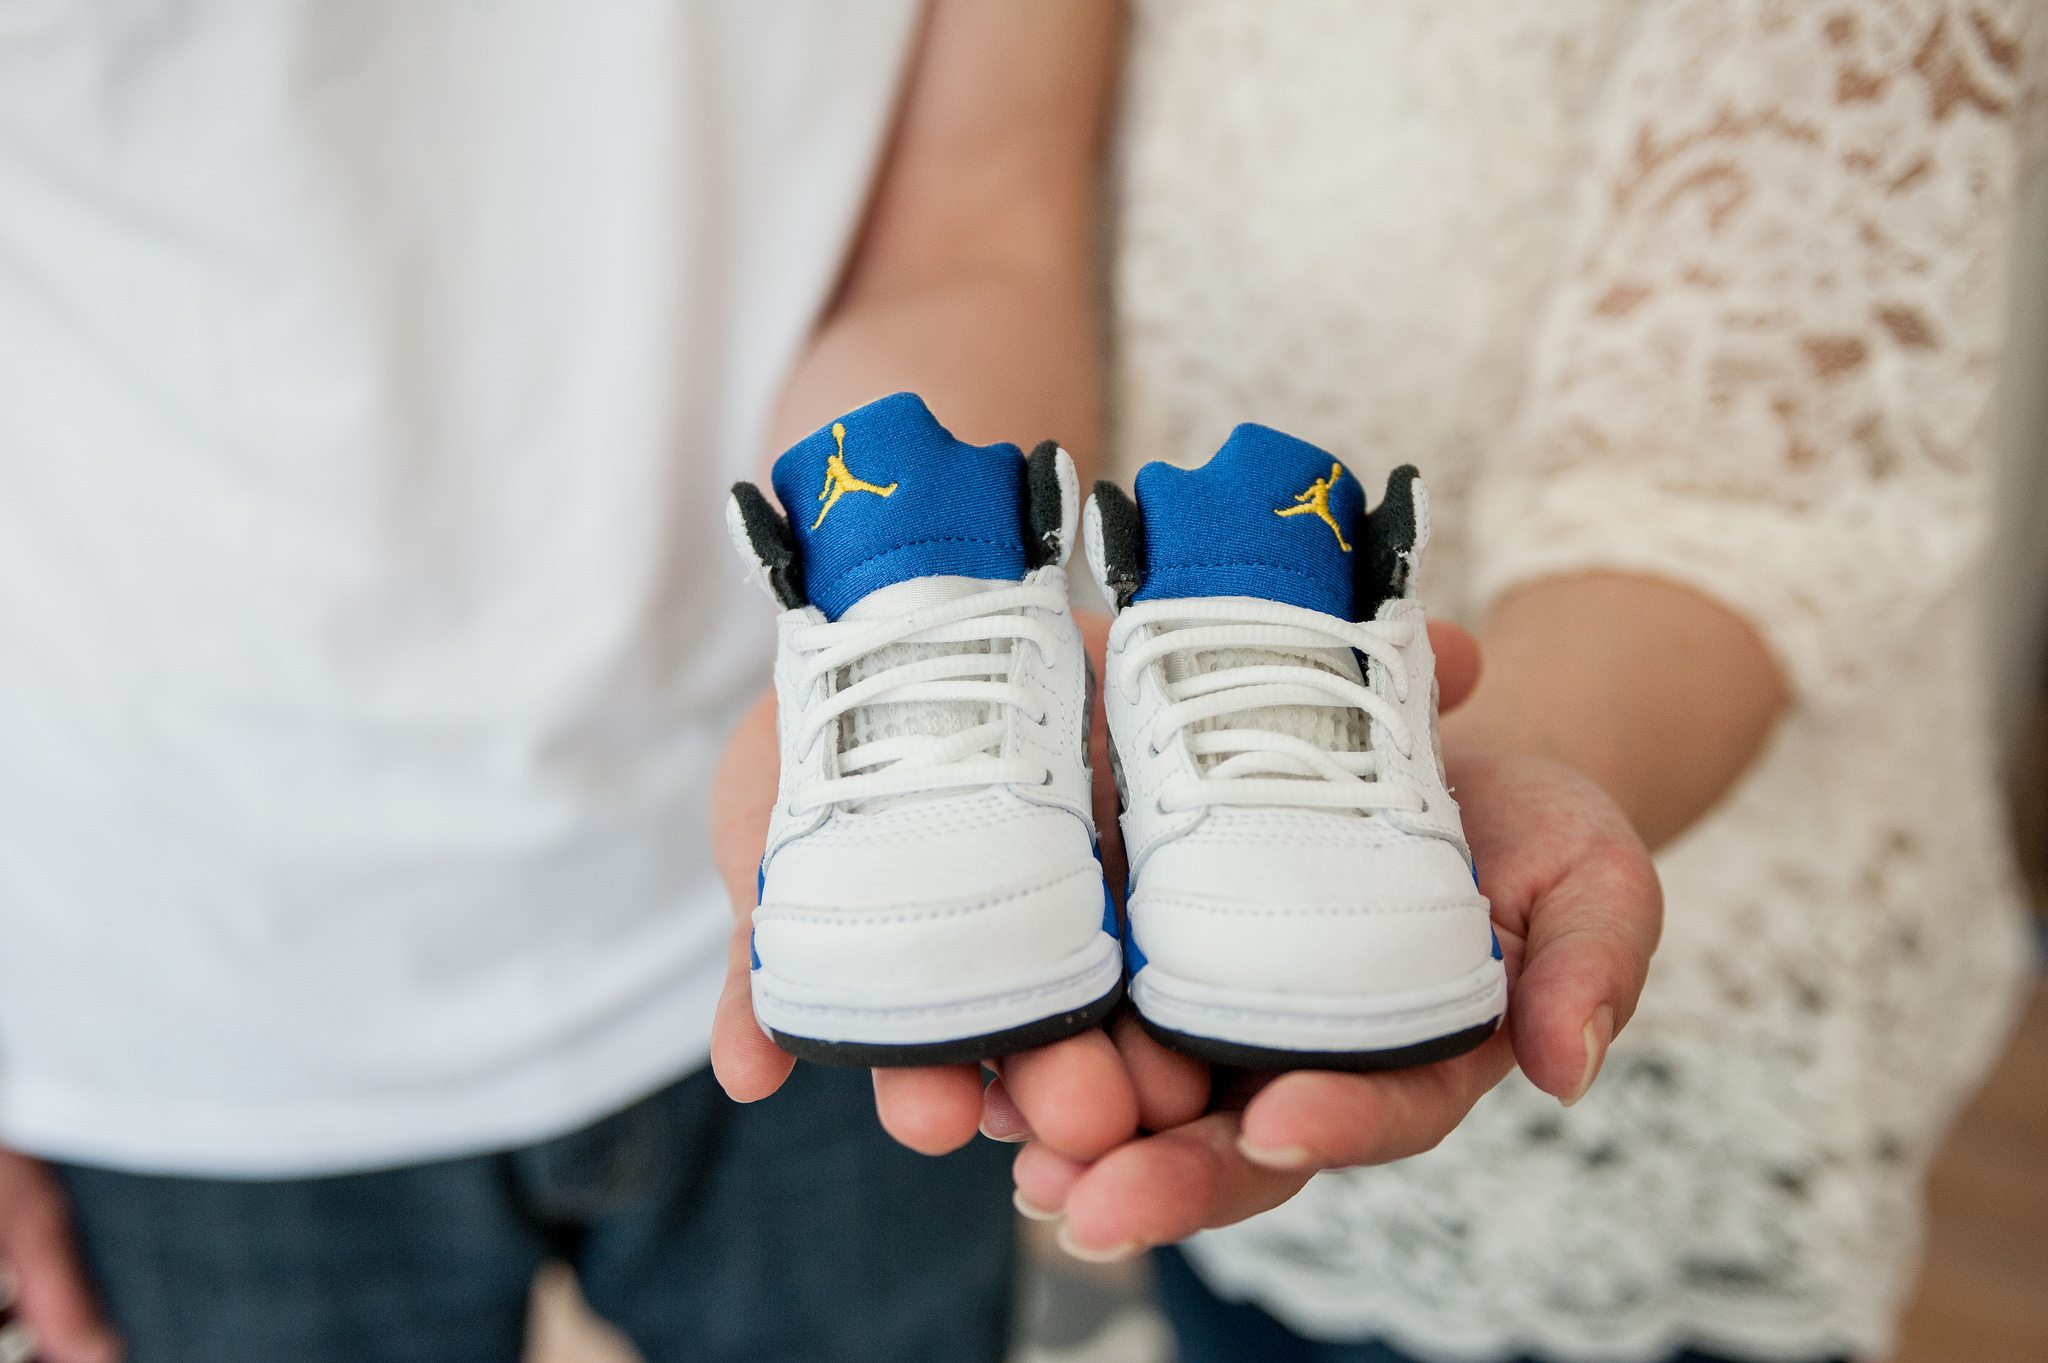 A couple hold a pair of baby shoes